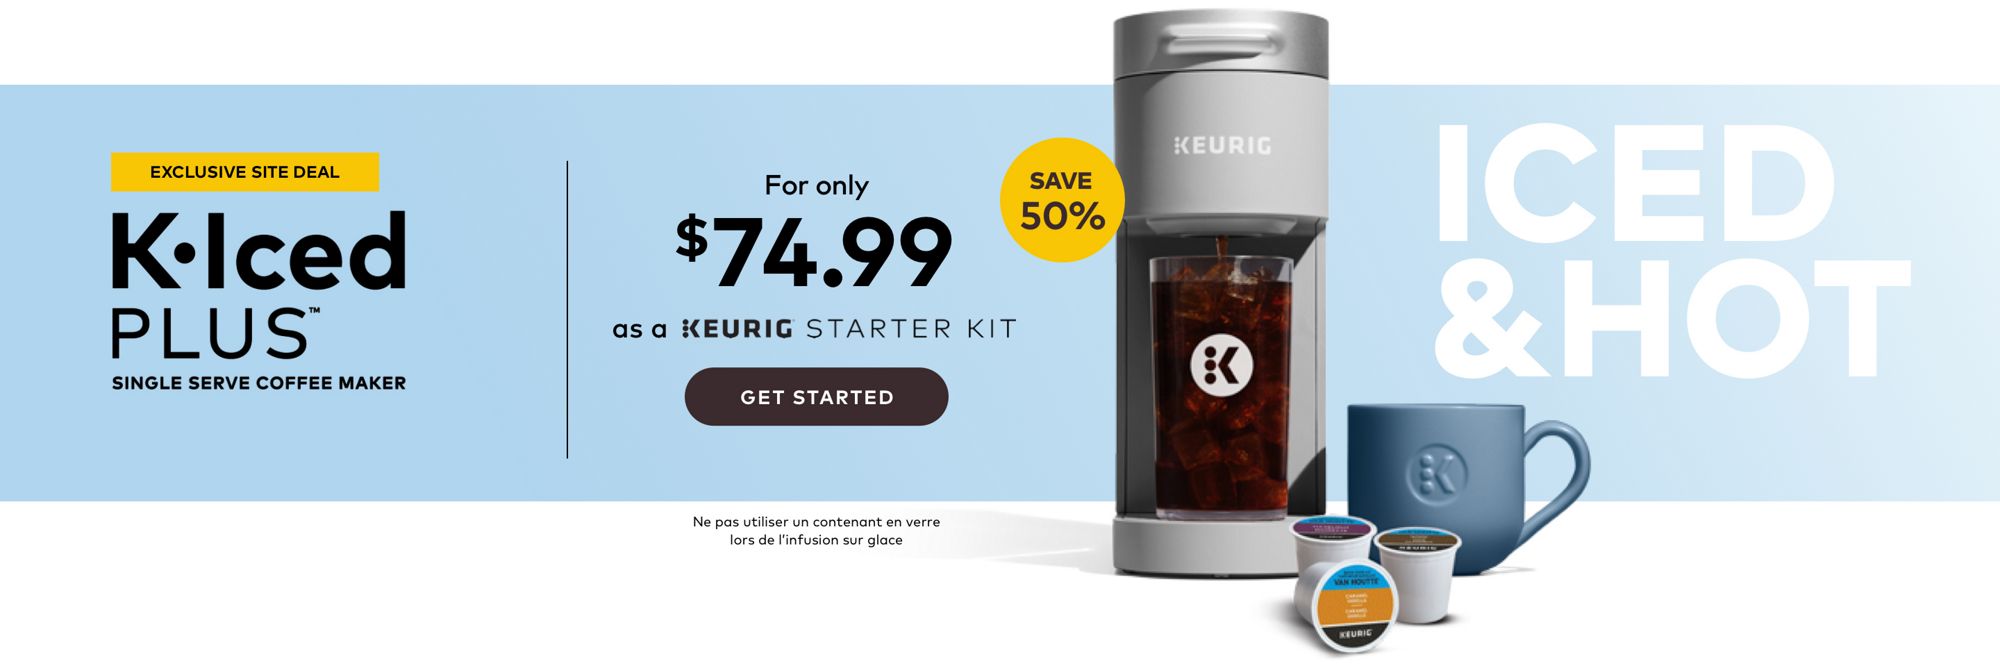 Exclusive Site Deal get a K-Iced™ Plus for only $74.99 as a KEURIG STARTER KIT